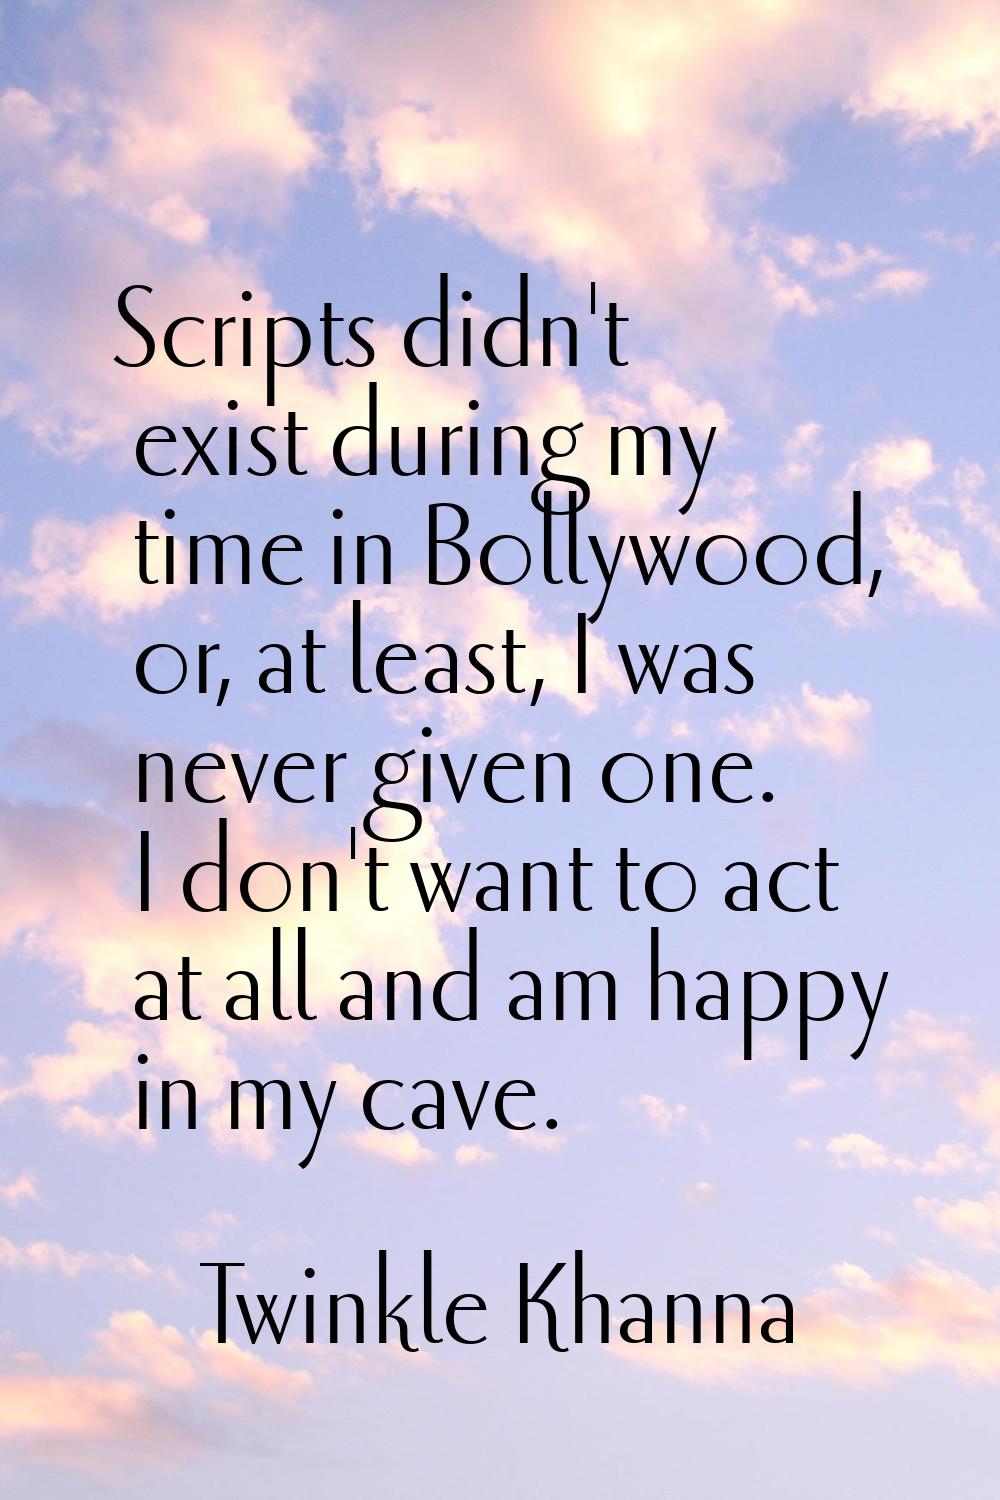 Scripts didn't exist during my time in Bollywood, or, at least, I was never given one. I don't want